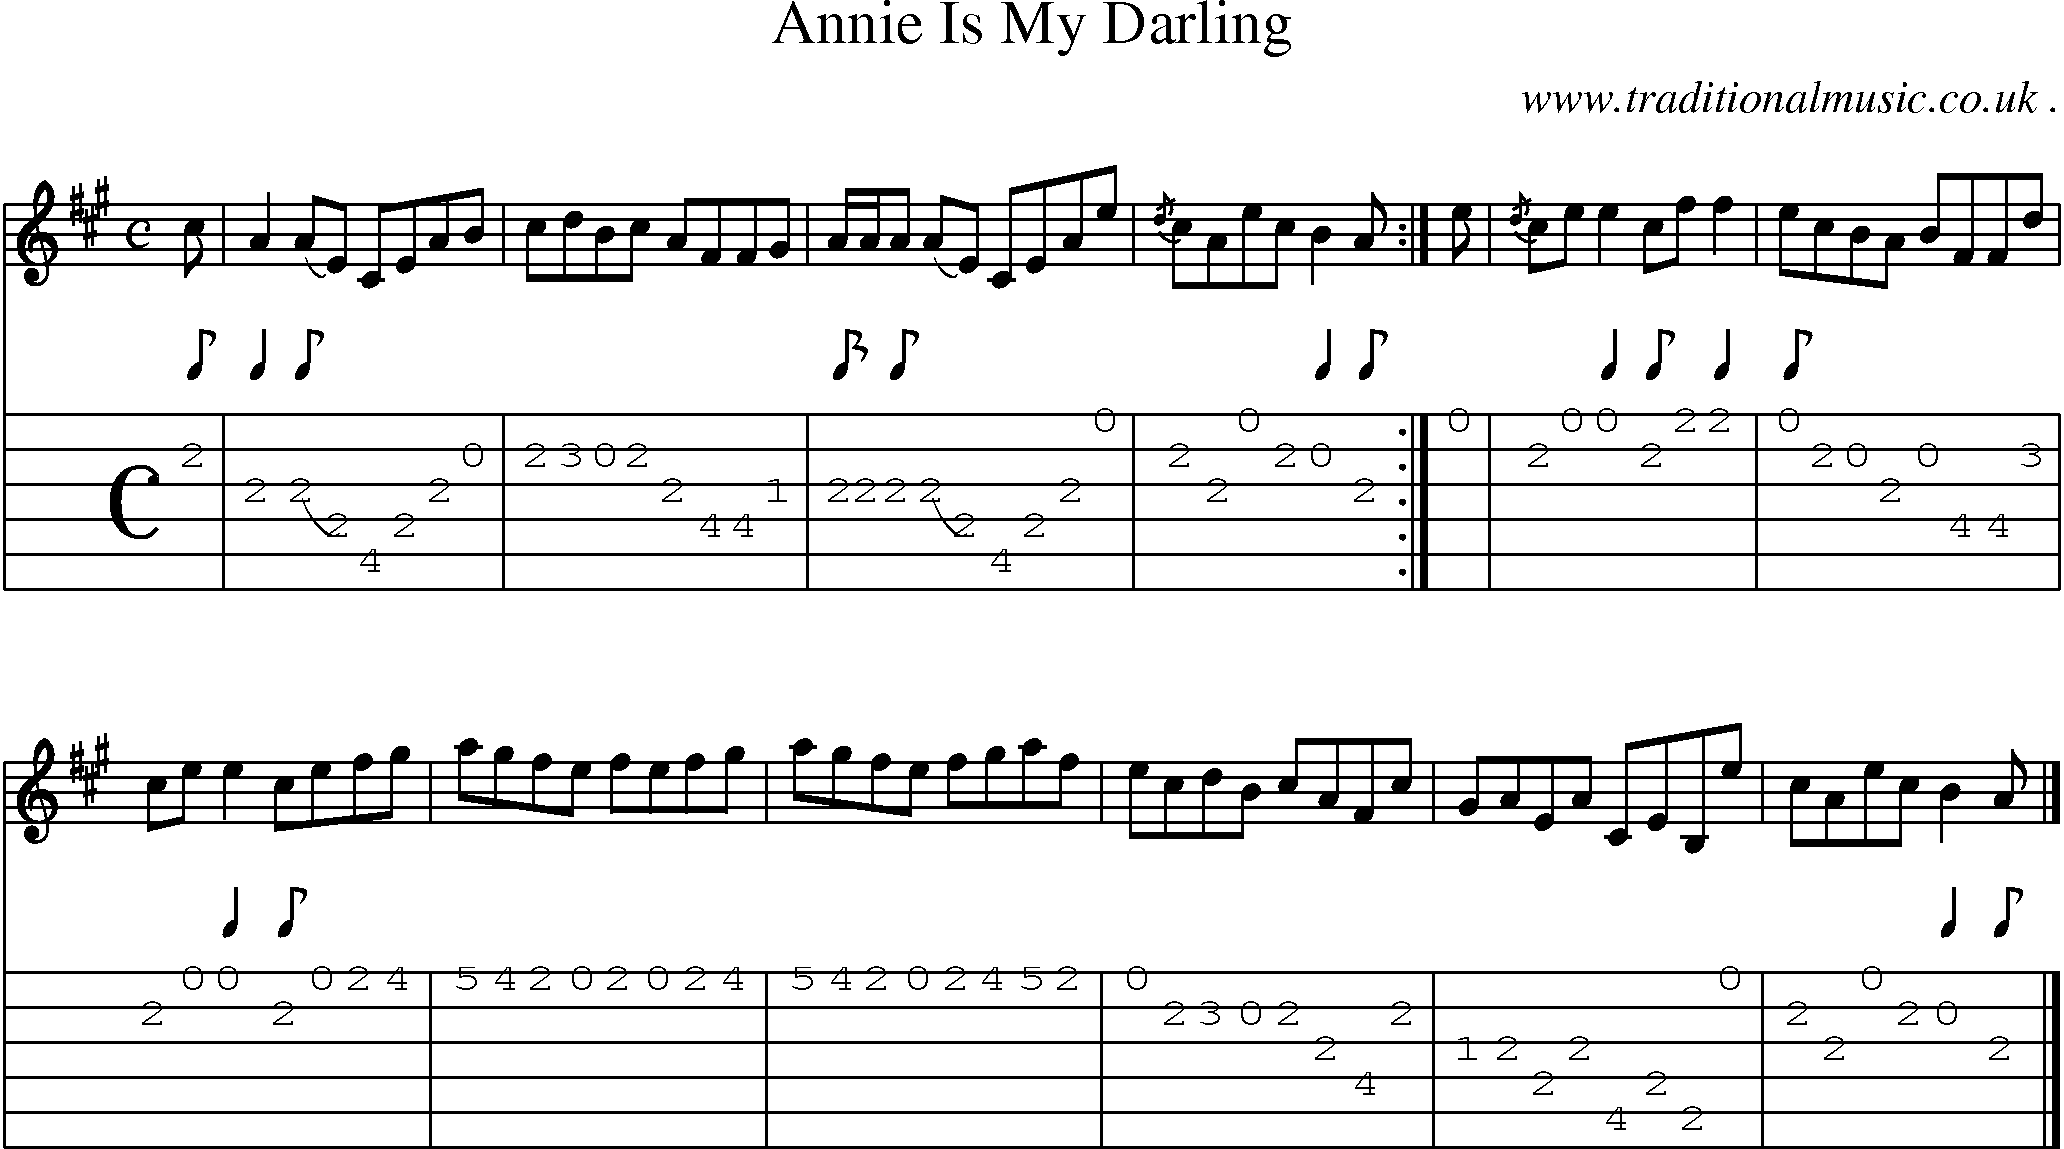 Sheet-music  score, Chords and Guitar Tabs for Annie Is My Darling